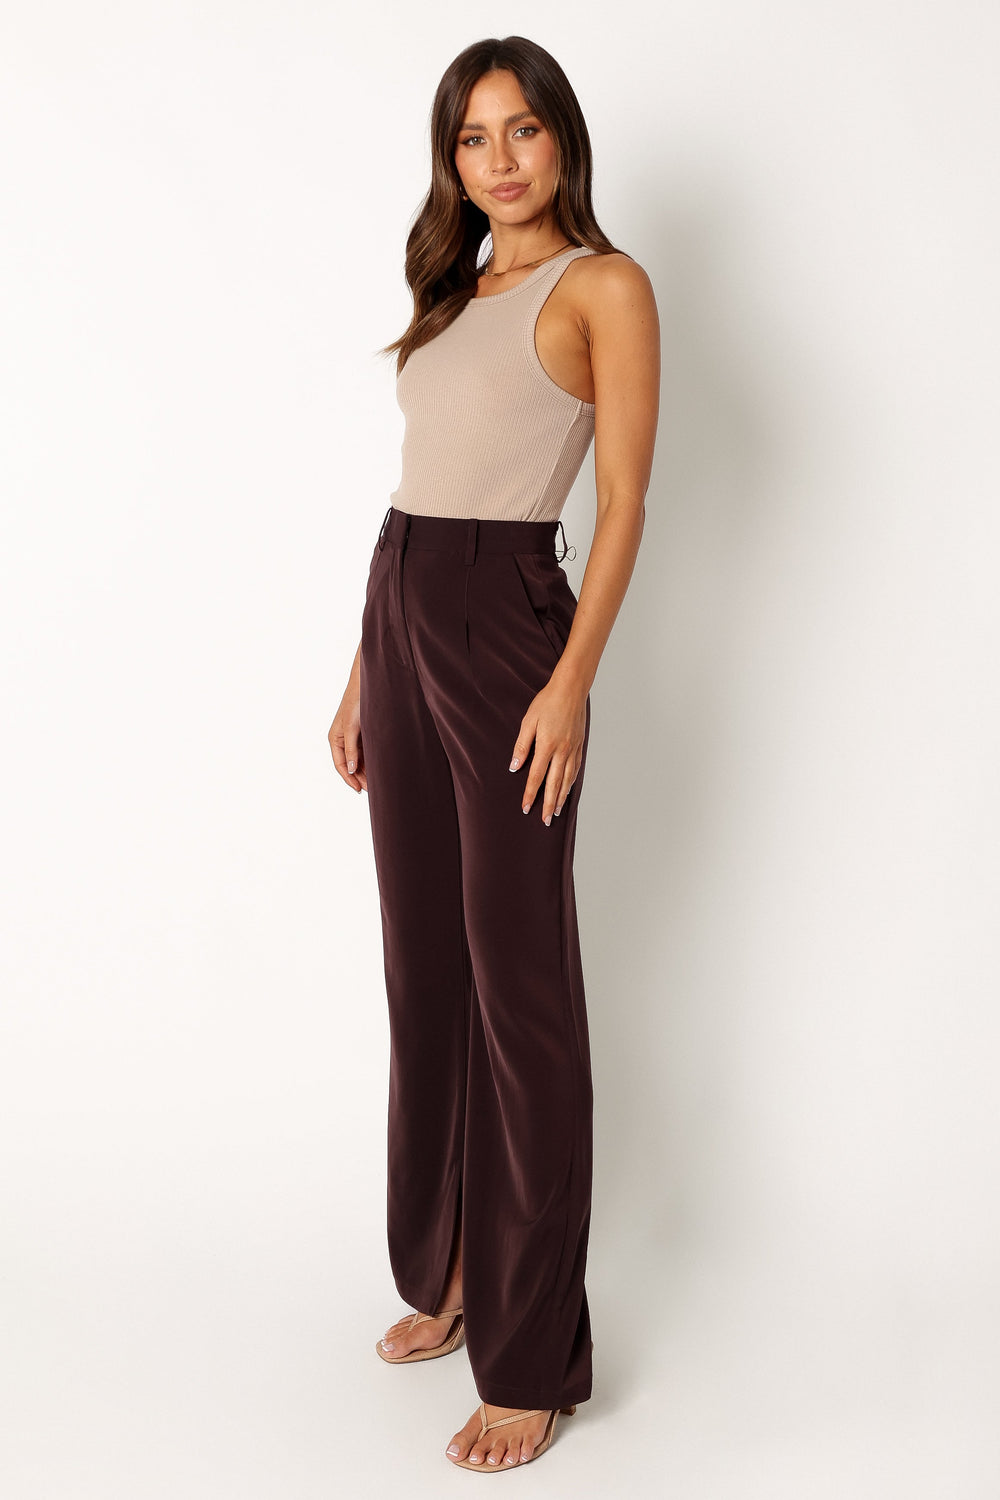 Petal and Pup USA BOTTOMS Neveah Silky Wide Leg Trousers - Merlot